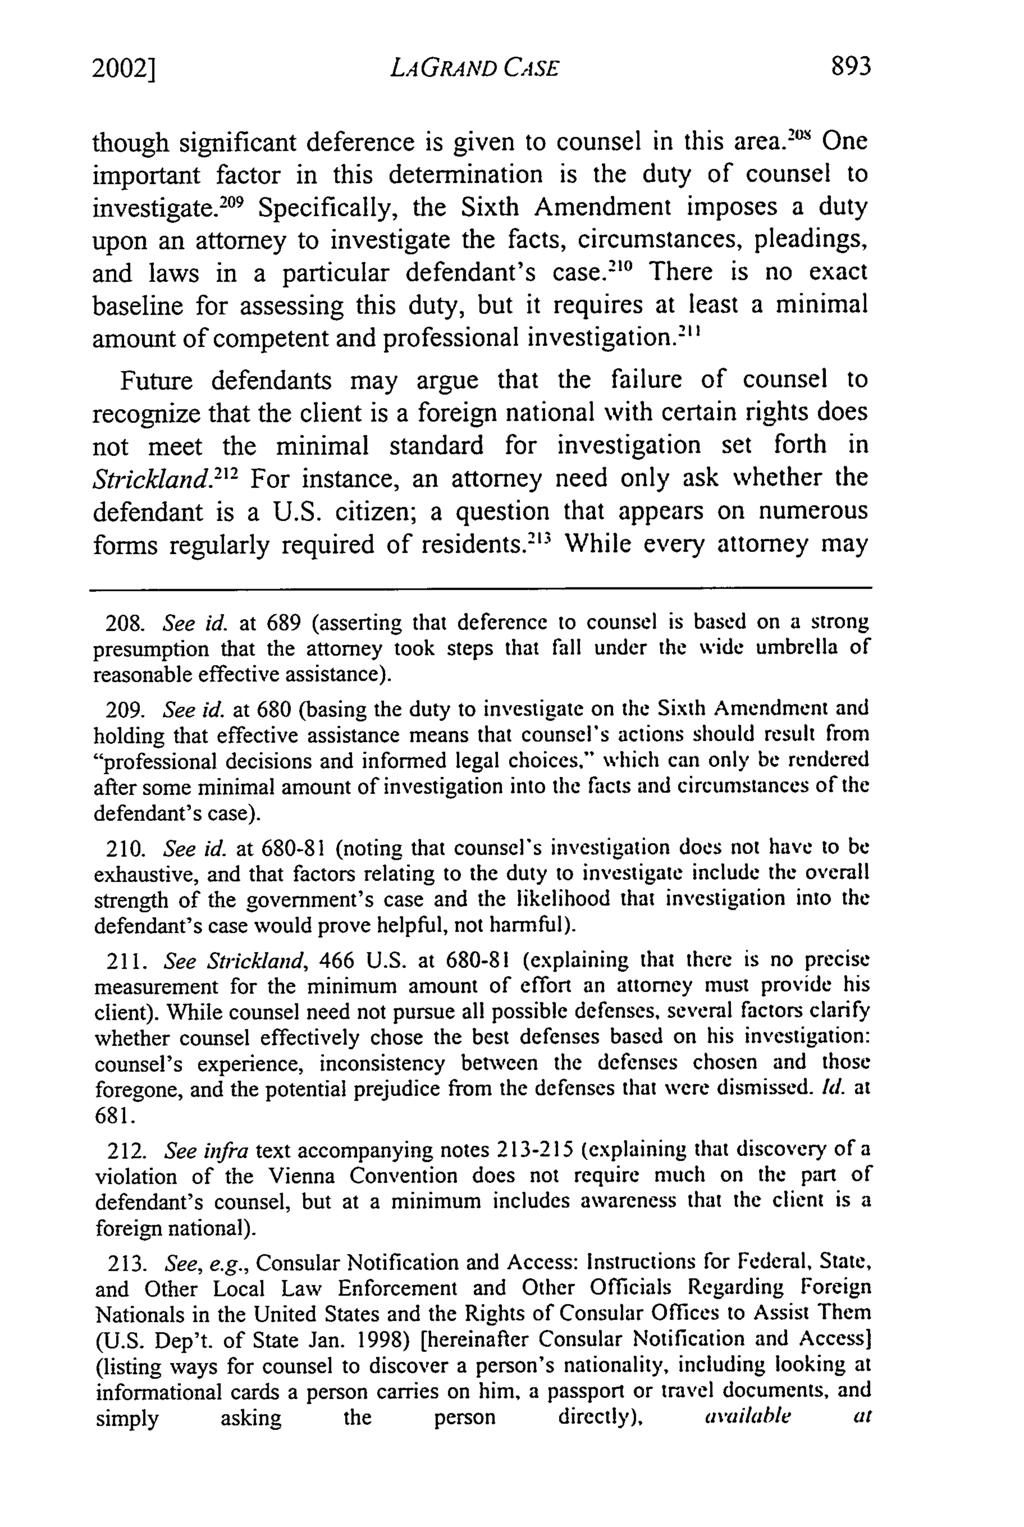 2002] LA GRAND CASE though significant deference is given to counsel in this area. 2 " One important factor in this determination is the duty of counsel to investigate.